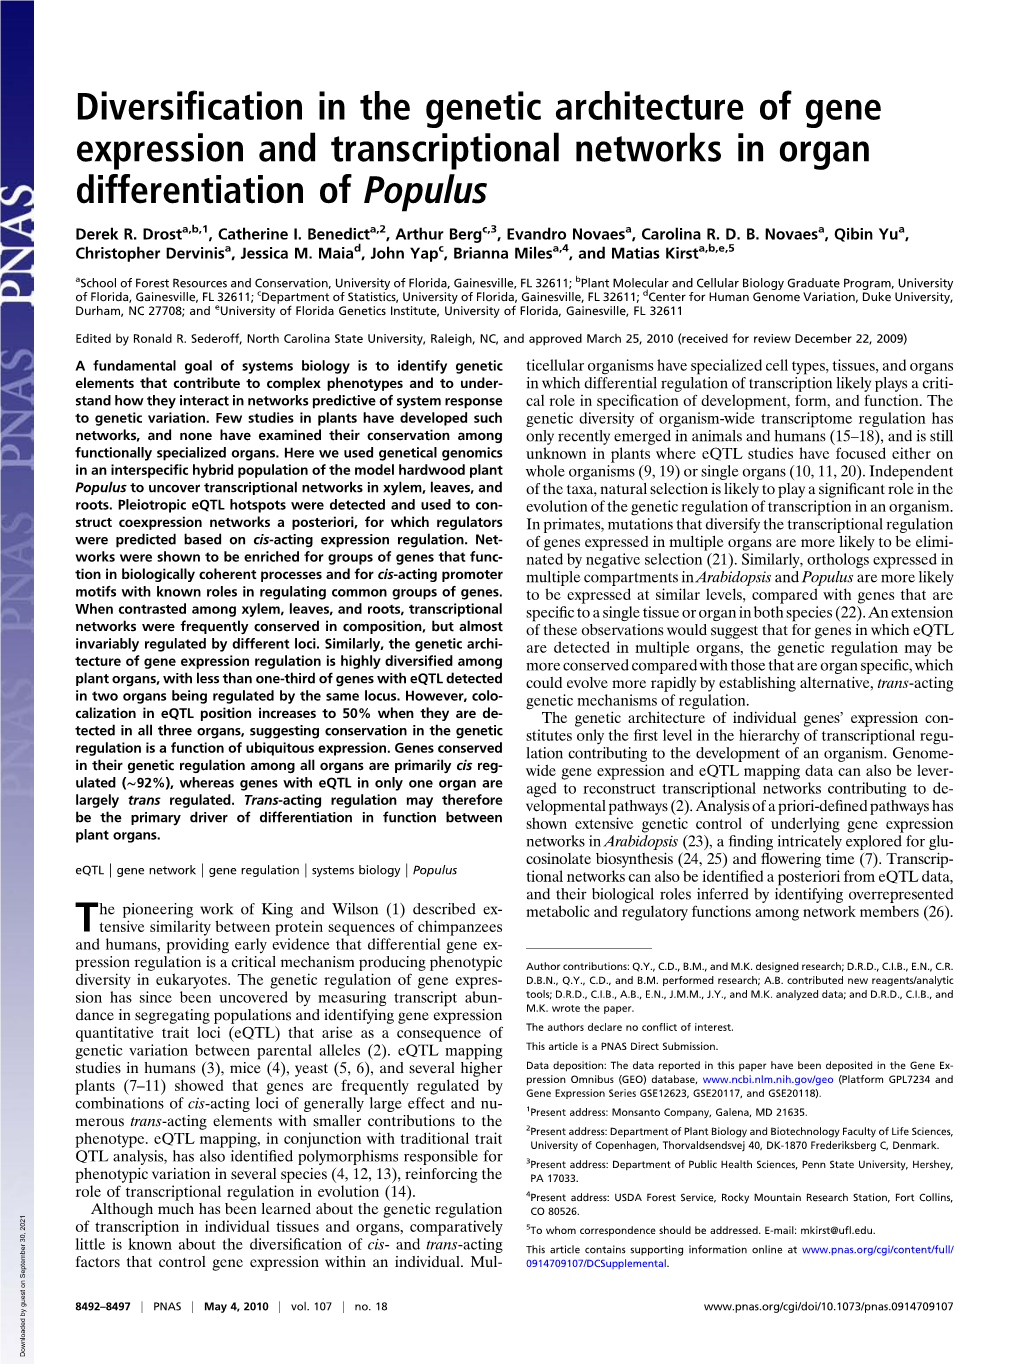 Diversification in the Genetic Architecture of Gene Expression and Transcriptional Networks in Organ Differentiation of Populus